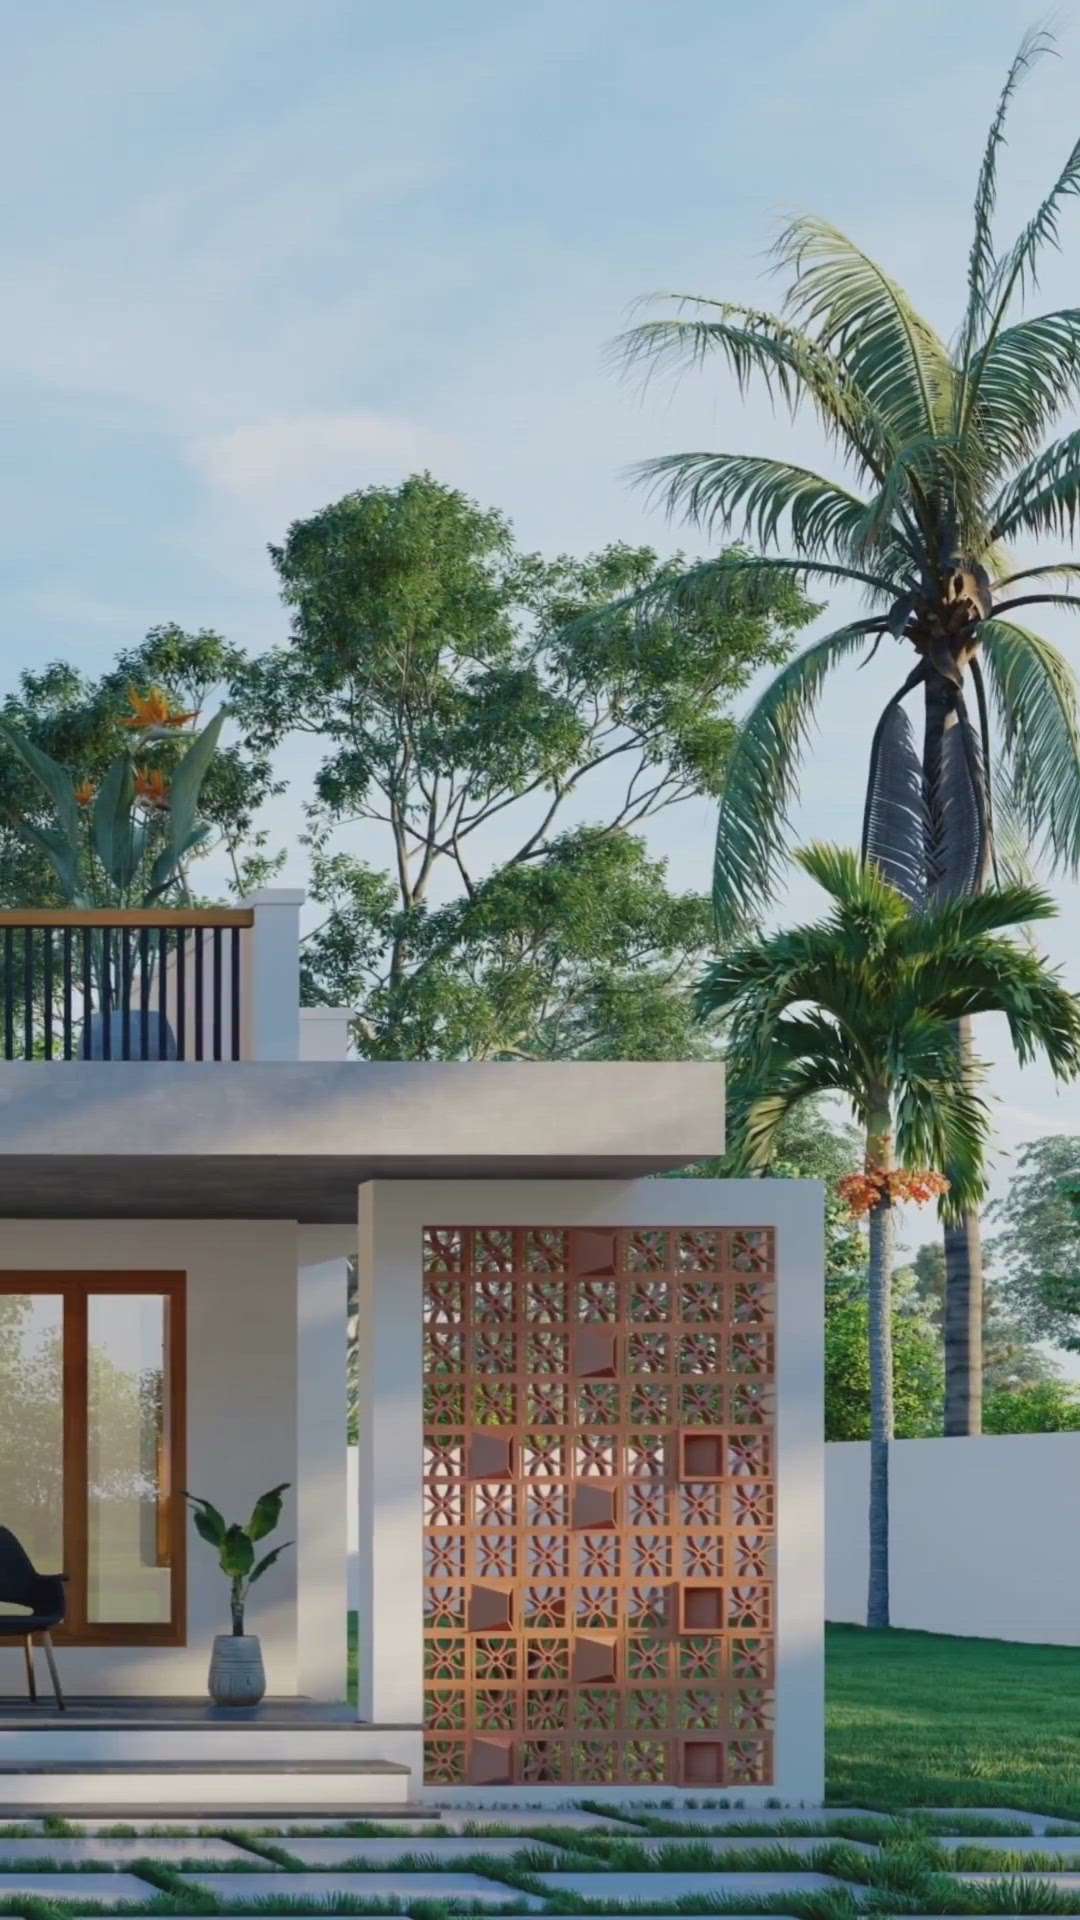 Minimal contemporary budget home                                                 | Architectural | Tropical | Earthen           

Location: Anjarakandy, Kannur, Kerala. 
Area: 2350sqft
Facing: East
Vastu: Yes
No. of Rooms:3
No. of Car Parking: 1
Start Year: 2022
Completion Year: 2023
Principle Architect : vipin
#HouseConstruction #constructionsite #constructioncompany #architecturedesigns #Architect #ElevationHome #ElevationDesign #3D_ELEVATION #update #HouseDesigns #KeralaStyleHouse #keralaplanners